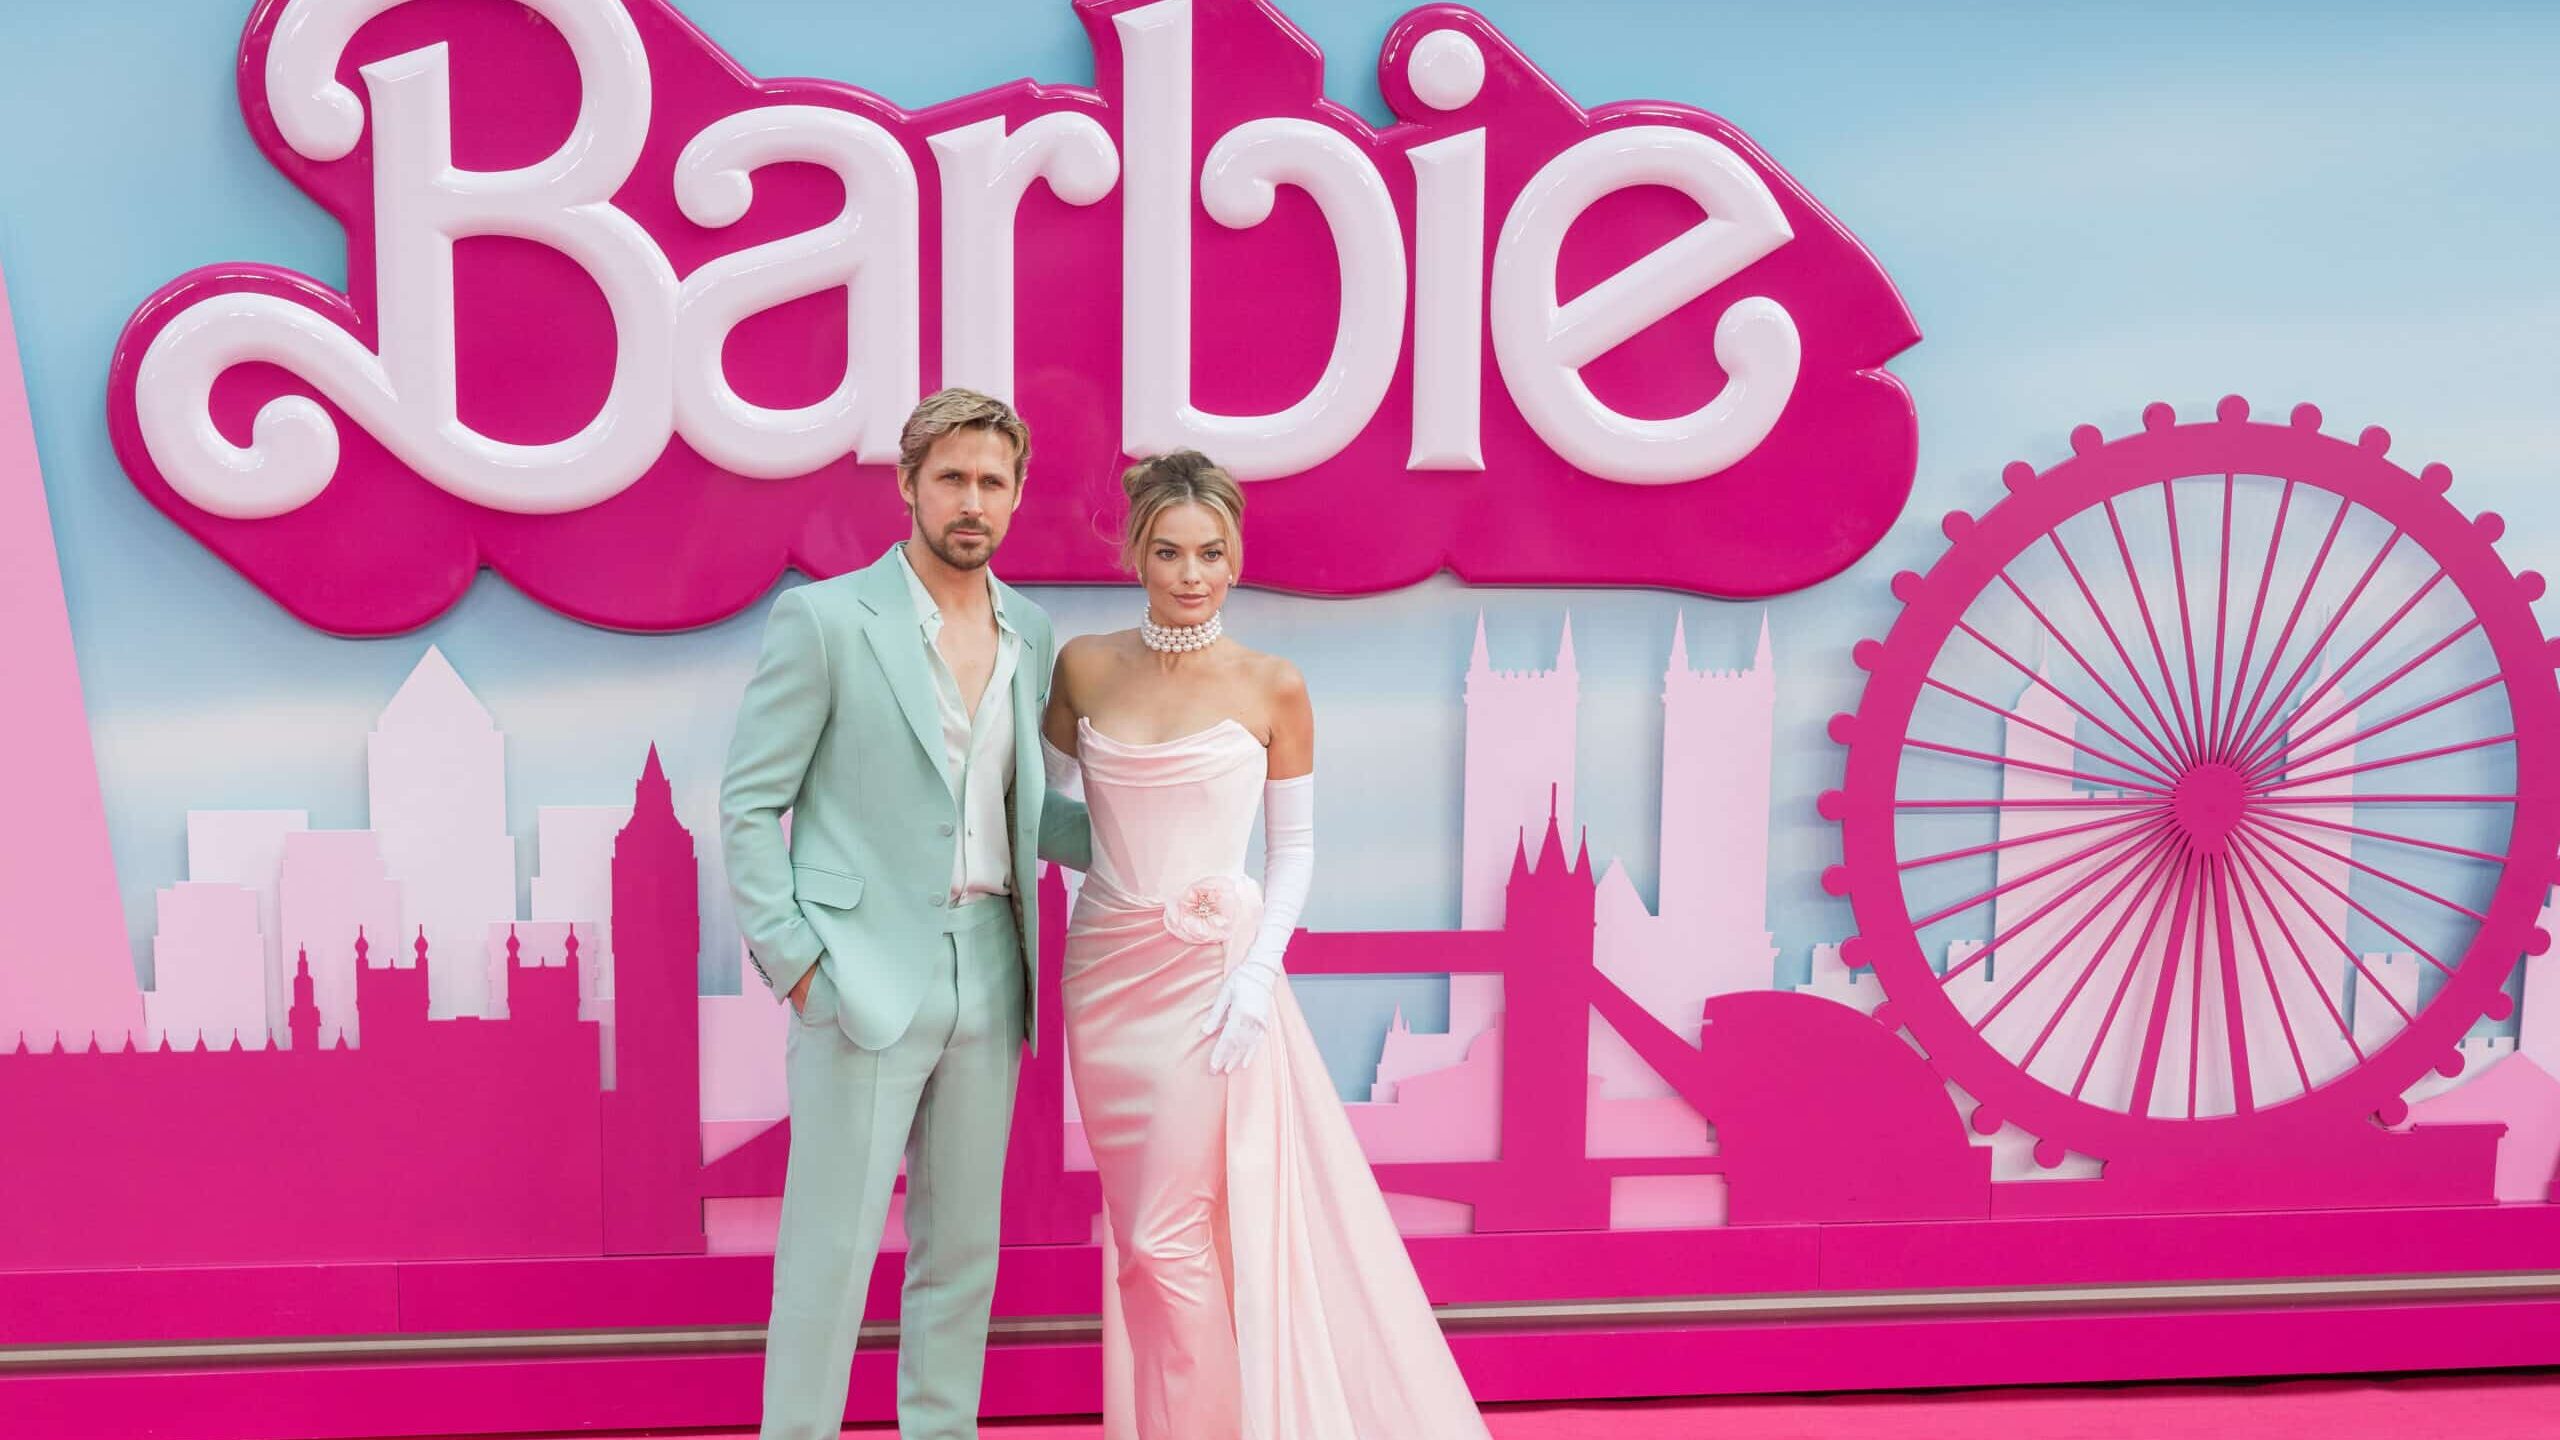 LONDON, UNITED KINGDOM - JULY 12: Margot Robbie (R) and Ryan Gosling attend the European premiere of 'Barbie' at the Cineworld Leicester Square in London, United Kingdom on July 12, 2023.